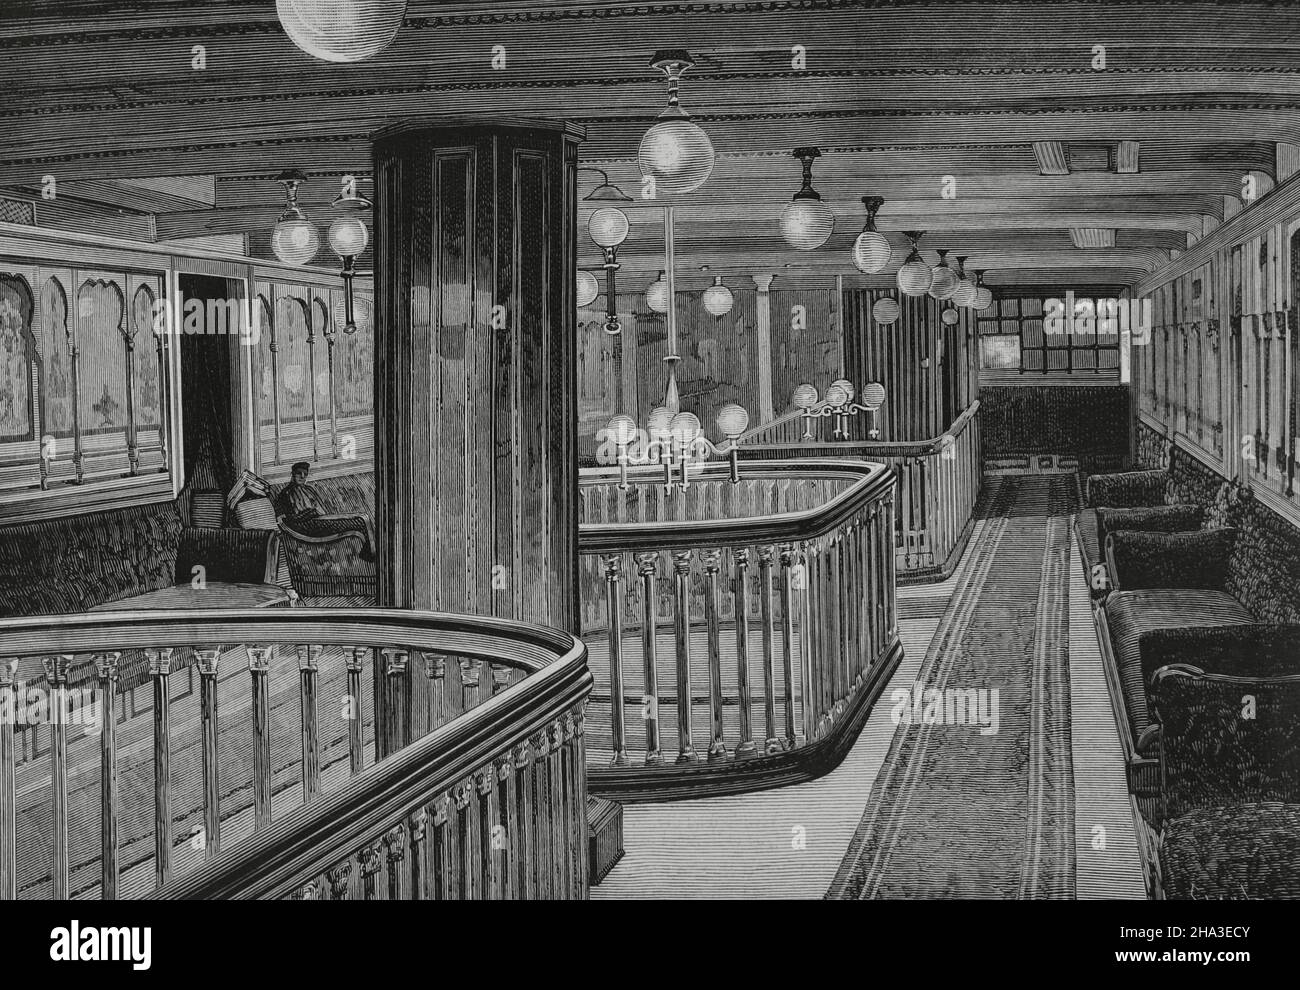 Spain. Steamship 'Antonio López', from the Compañía Trasatlántica Española, owned by the Marqués de Comillas. It was built in 1881 by Denny and Bross company in Dumbarton (Scotland), becoming the first Spanish ship with a steel hull and electric light. Interior of the aft saloon, illuminated by electric light. Drawing by A. de Caula. Engraving by Capuz. La Ilustración Española y Americana, 1882. Stock Photo